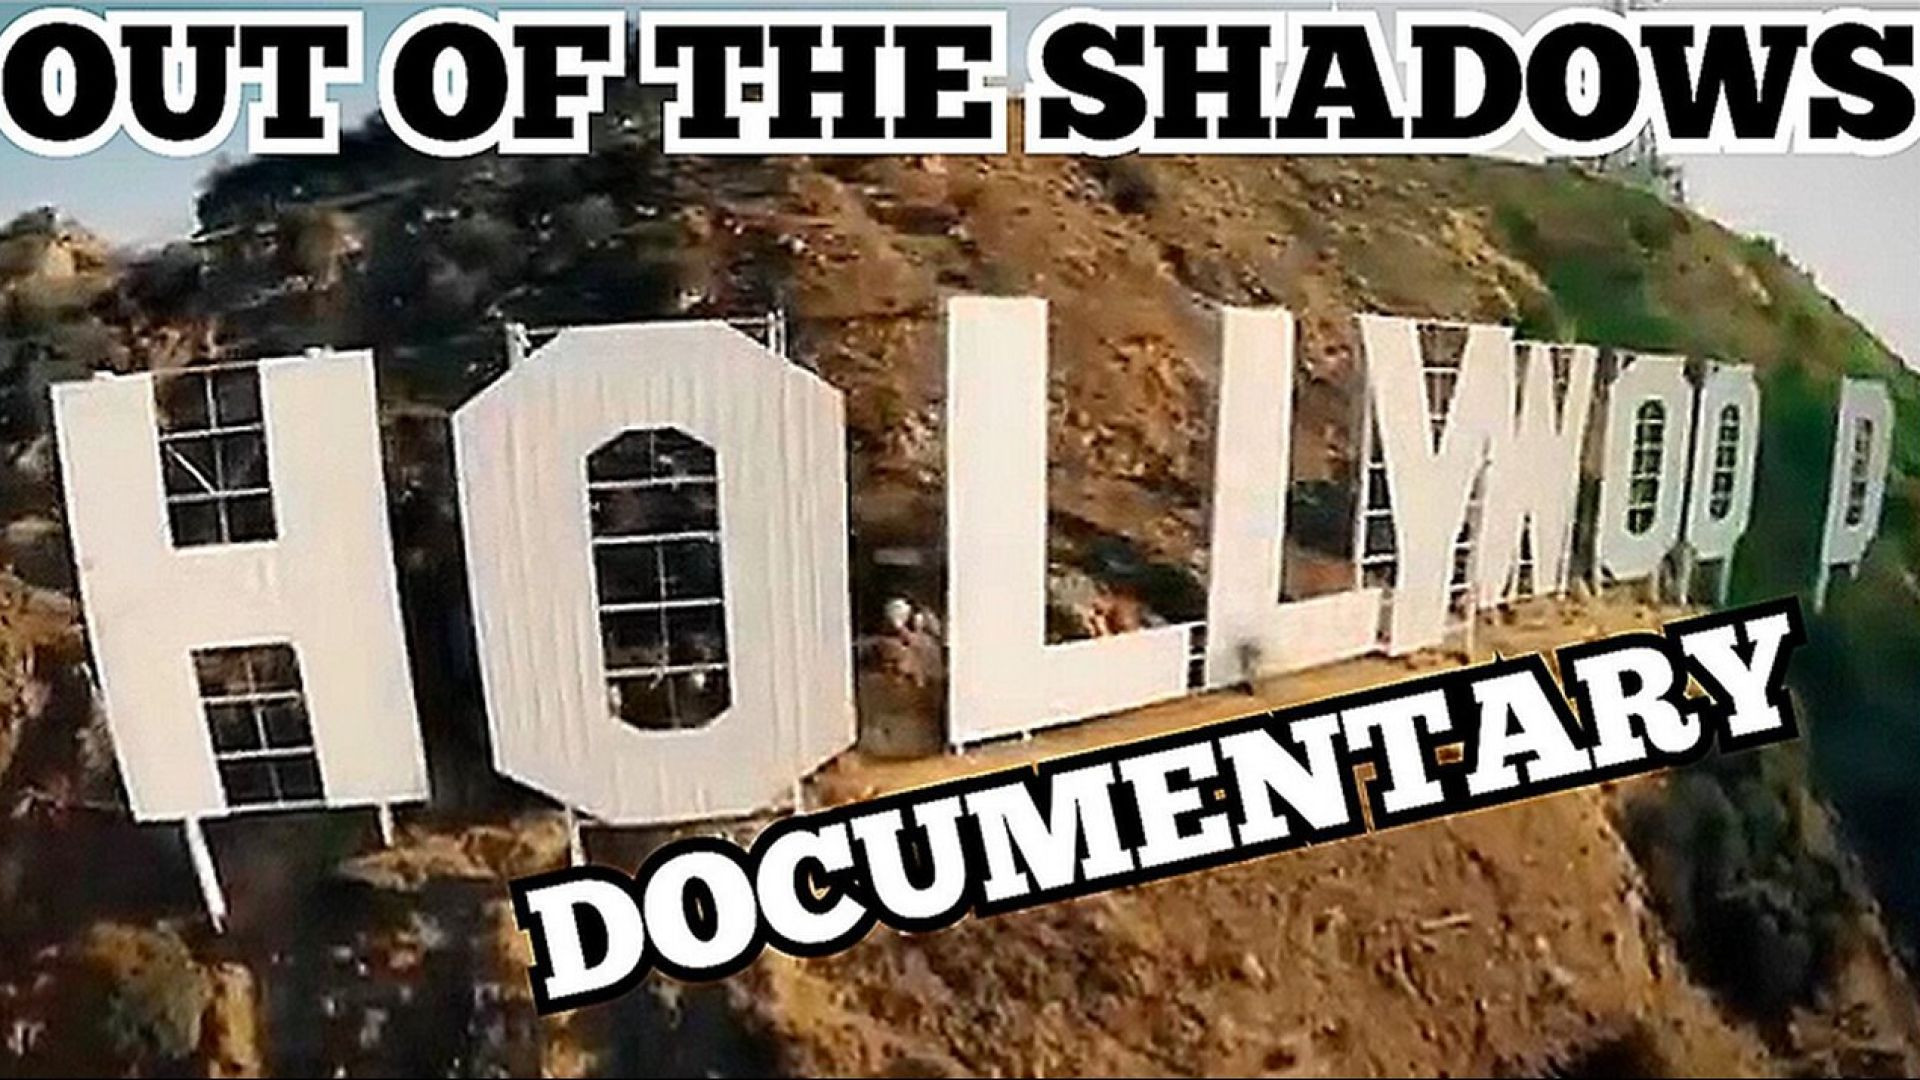 OUT OF SHADOWS - OFFICIAL HOLLYWOOD CIA DOKU - LIZ CROKIN & MIKE SMITH